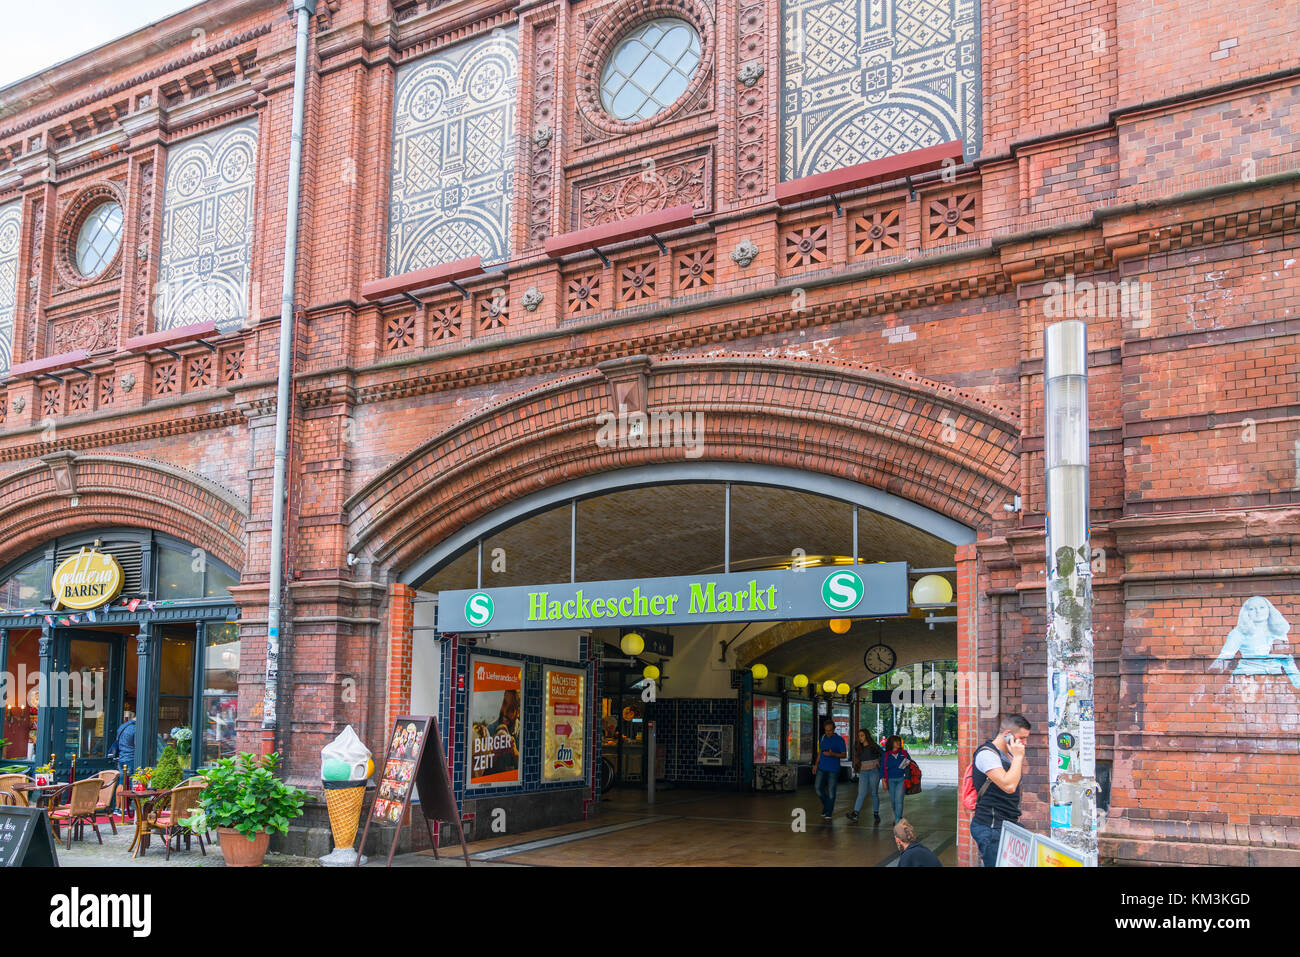 BERLIN, GERMANY - AUGUST 27, 2017; Hackescher Market station entrance people passing through ornate historic building of Renaissance Revival architect Stock Photo